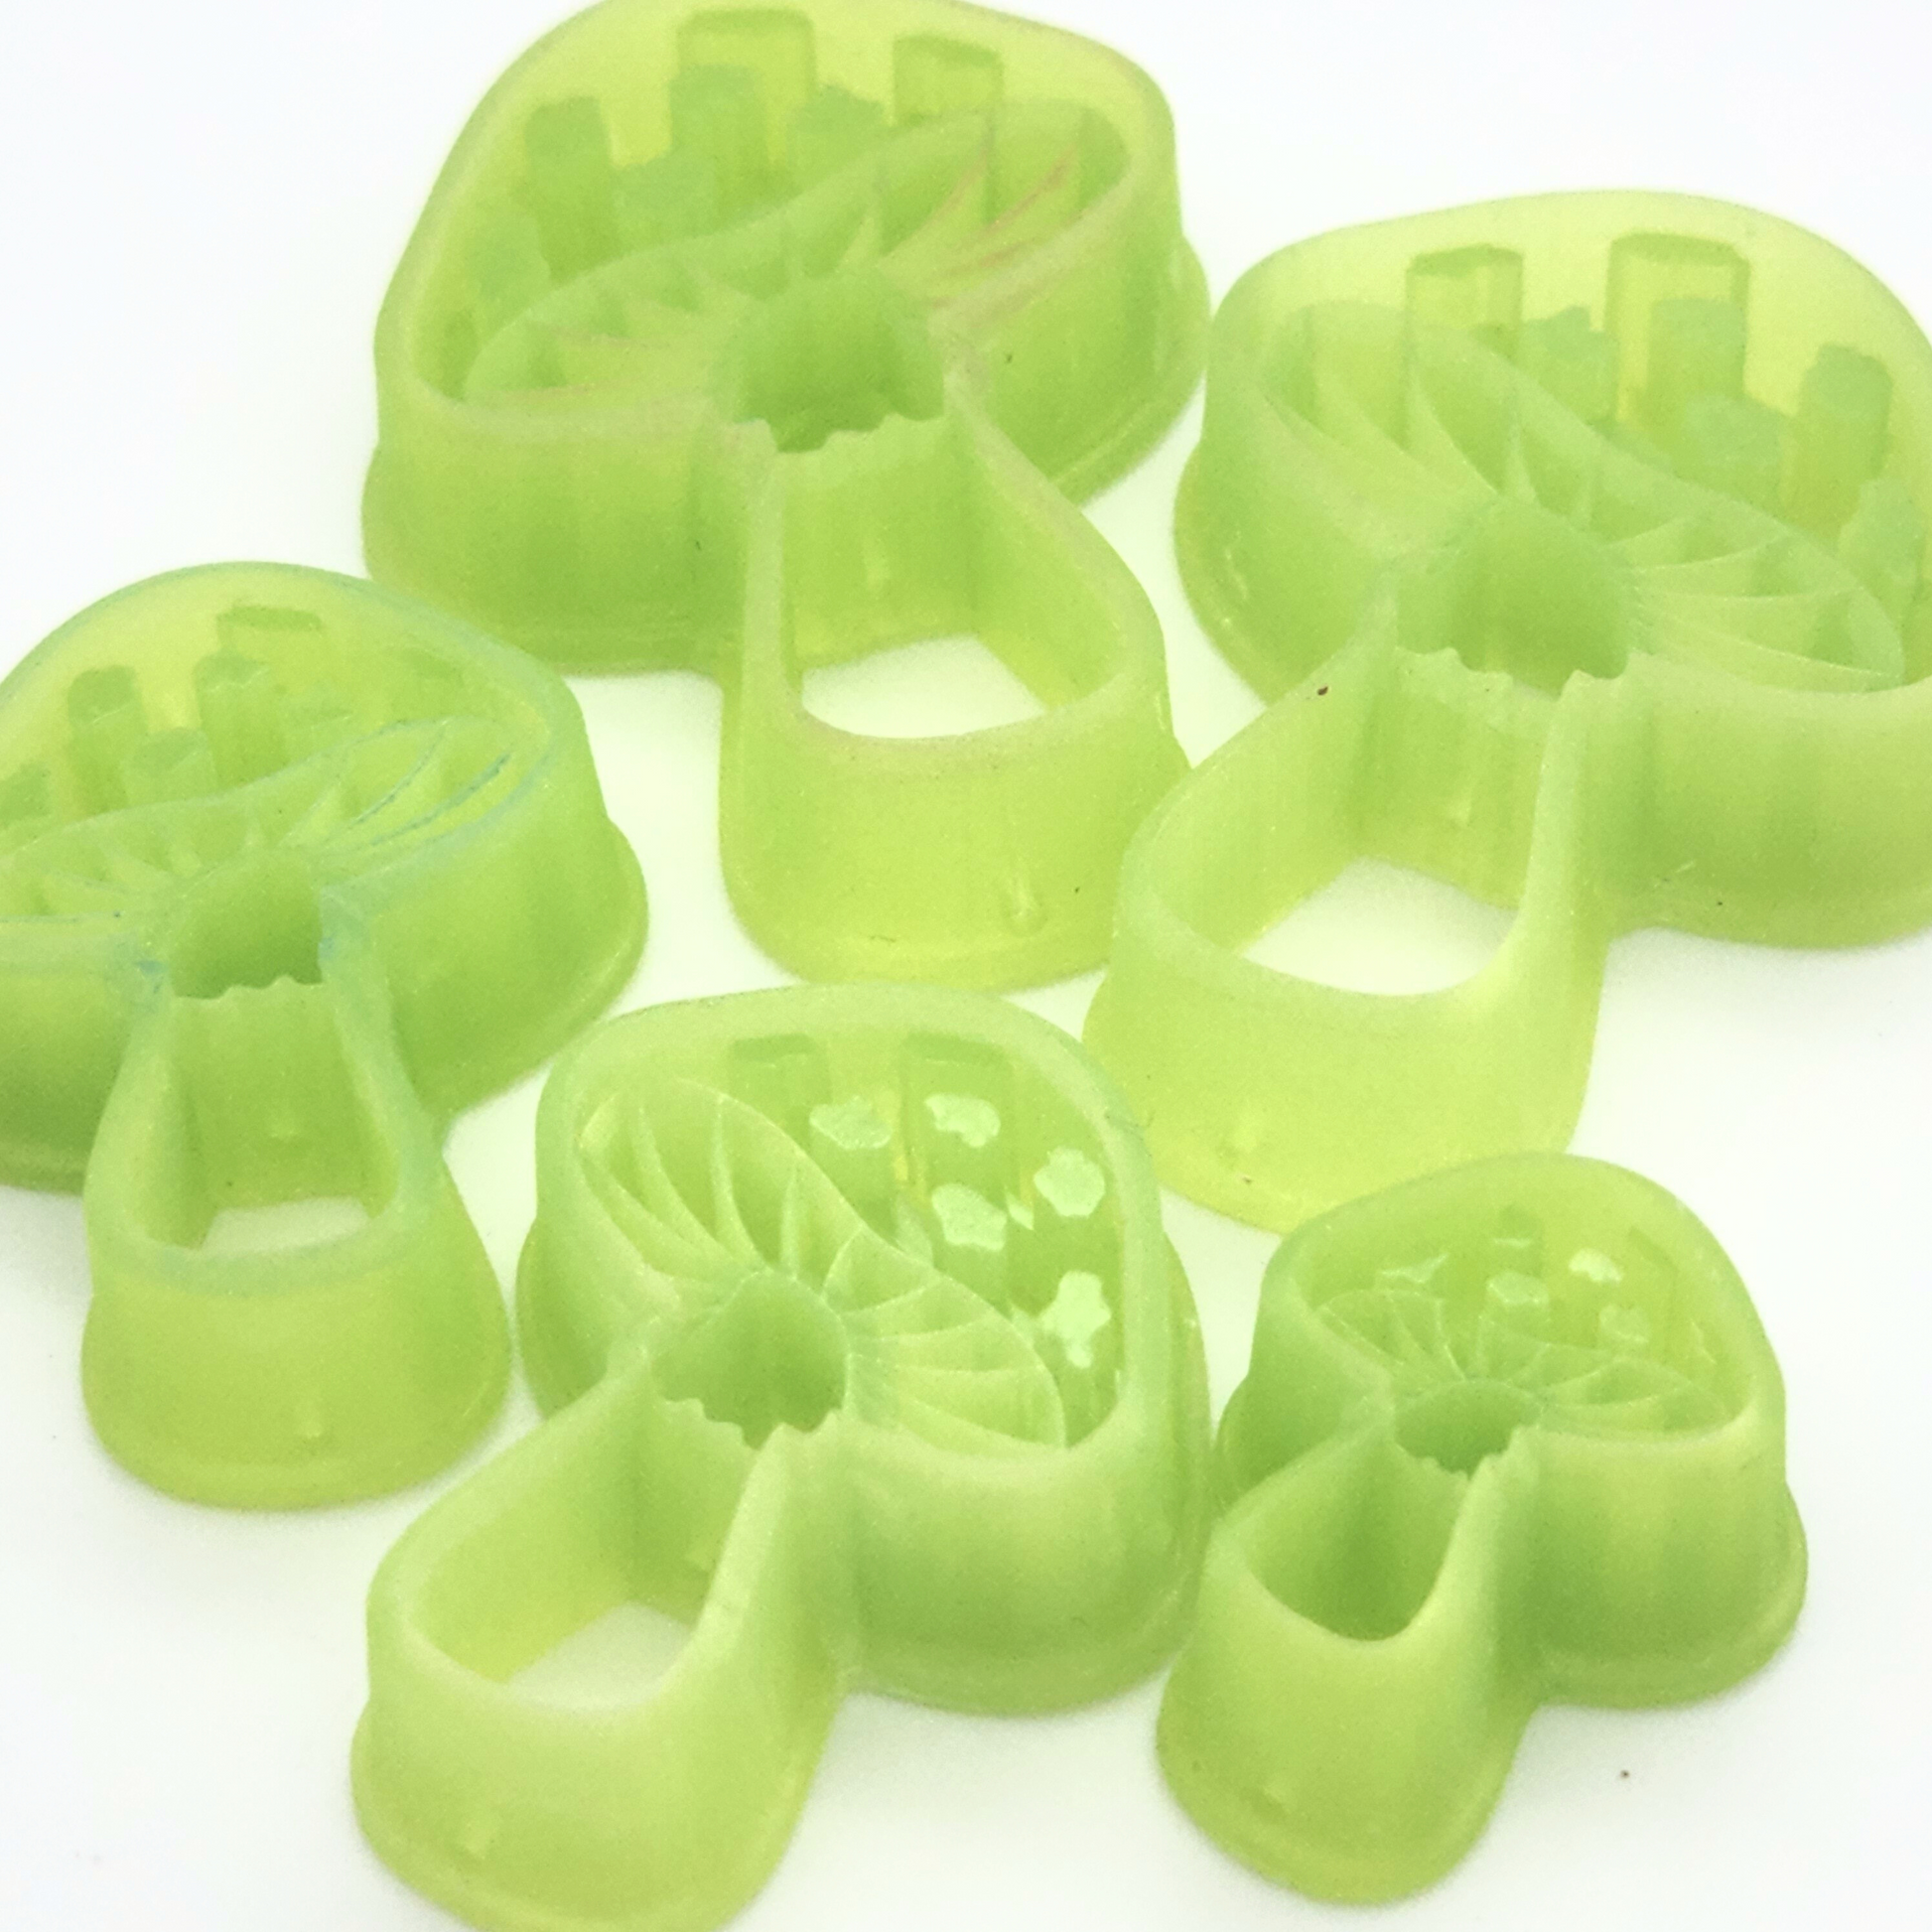 3D Printed Emboss Mushrooms Polymer Clay Cutter Details